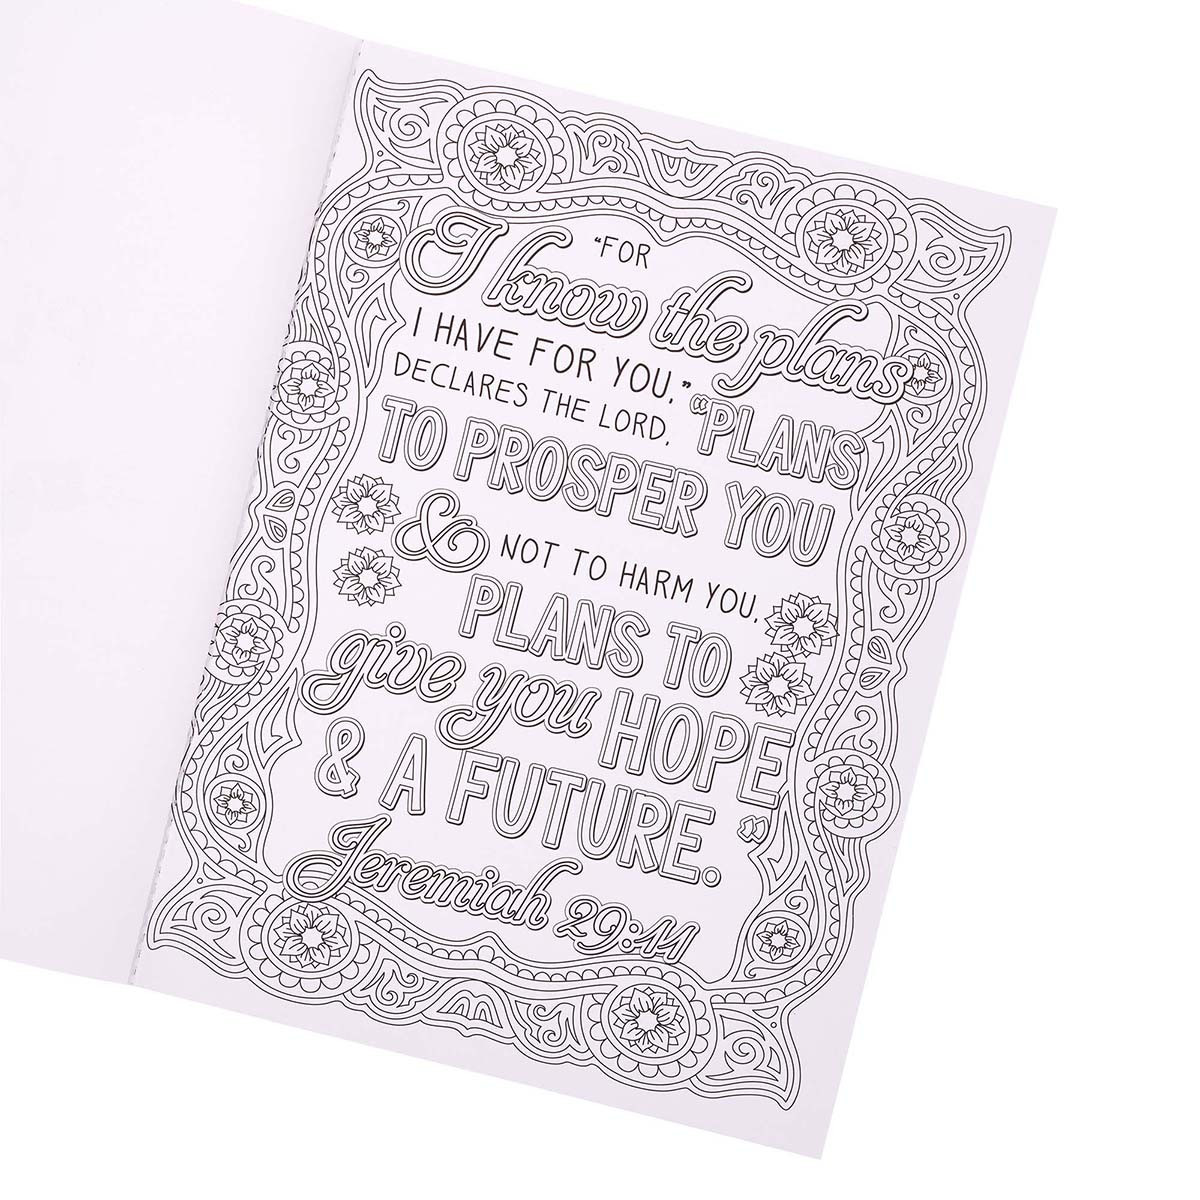 Jeremiah 29:11 Adult Coloring Book